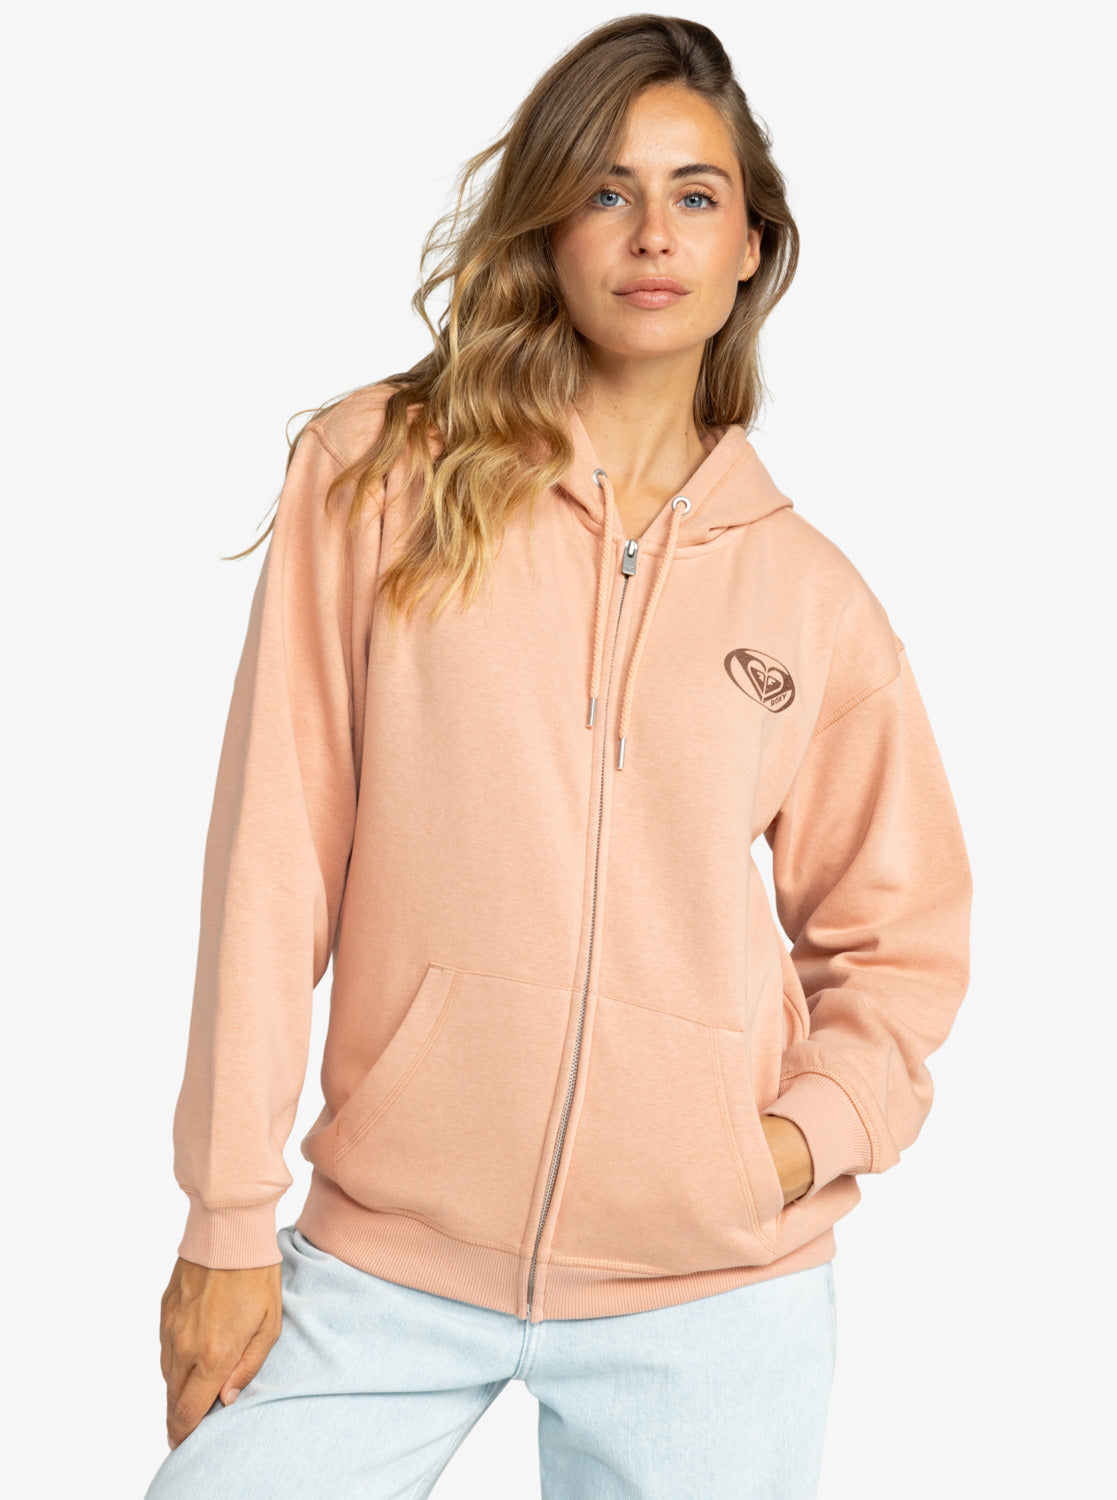 Roxy Surf Stoked Zipped Brushed - Cafe Creme - Star Surf + Skate